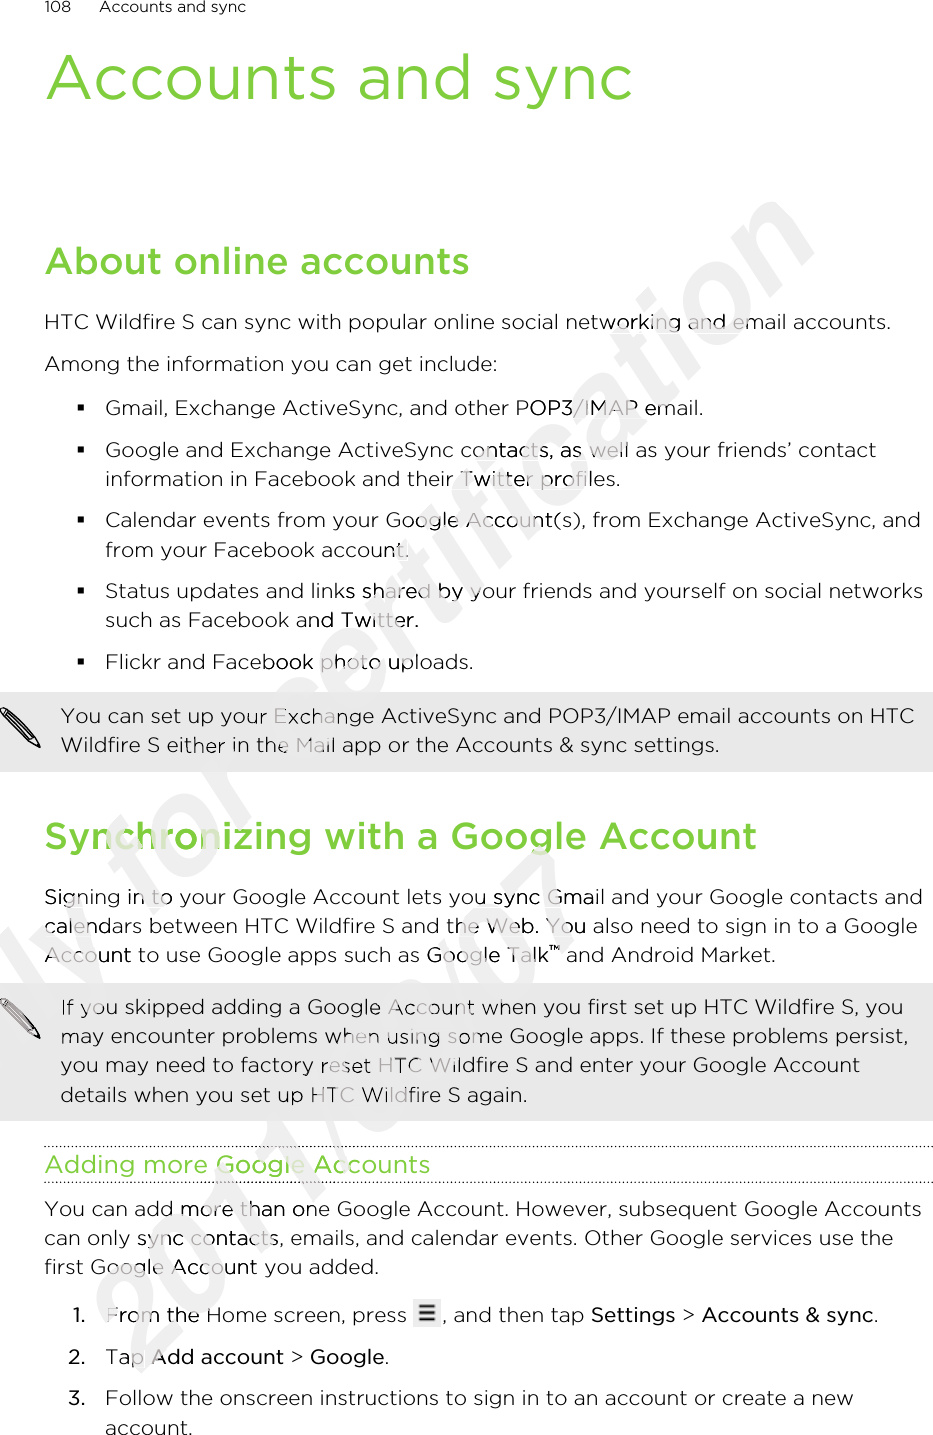 Accounts and syncAbout online accountsHTC Wildfire S can sync with popular online social networking and email accounts.Among the information you can get include:§Gmail, Exchange ActiveSync, and other POP3/IMAP email.§Google and Exchange ActiveSync contacts, as well as your friends’ contactinformation in Facebook and their Twitter profiles.§Calendar events from your Google Account(s), from Exchange ActiveSync, andfrom your Facebook account.§Status updates and links shared by your friends and yourself on social networkssuch as Facebook and Twitter.§Flickr and Facebook photo uploads.You can set up your Exchange ActiveSync and POP3/IMAP email accounts on HTCWildfire S either in the Mail app or the Accounts &amp; sync settings.Synchronizing with a Google AccountSigning in to your Google Account lets you sync Gmail and your Google contacts andcalendars between HTC Wildfire S and the Web. You also need to sign in to a GoogleAccount to use Google apps such as Google Talk™ and Android Market.If you skipped adding a Google Account when you first set up HTC Wildfire S, youmay encounter problems when using some Google apps. If these problems persist,you may need to factory reset HTC Wildfire S and enter your Google Accountdetails when you set up HTC Wildfire S again.Adding more Google AccountsYou can add more than one Google Account. However, subsequent Google Accountscan only sync contacts, emails, and calendar events. Other Google services use thefirst Google Account you added.1. From the Home screen, press  , and then tap Settings &gt; Accounts &amp; sync.2. Tap Add account &gt; Google.3. Follow the onscreen instructions to sign in to an account or create a newaccount.108 Accounts and syncOnly Signing in to your Google Account lets you sync Gmail and your Google contacts andOnly Signing in to your Google Account lets you sync Gmail and your Google contacts andcalendars between HTC Wildfire S and the Web. You also need to sign in to a GoogleOnly calendars between HTC Wildfire S and the Web. You also need to sign in to a GoogleAccount to use Google apps such as Google TalkOnly Account to use Google apps such as Google TalkOnly Only Only Only Only Only Only Only Only Only Only Only Only If you skipped adding a Google Account when you first set up HTC Wildfire S, youOnly If you skipped adding a Google Account when you first set up HTC Wildfire S, youmay encounter problems when using some Google apps. If these problems persist,Only may encounter problems when using some Google apps. If these problems persist,for for You can set up your Exchange ActiveSync and POP3/IMAP email accounts on HTCfor You can set up your Exchange ActiveSync and POP3/IMAP email accounts on HTCWildfire S either in the Mail app or the Accounts &amp; sync settings.for Wildfire S either in the Mail app or the Accounts &amp; sync settings.Synchronizing with a Google Accountfor Synchronizing with a Google AccountSigning in to your Google Account lets you sync Gmail and your Google contacts andfor Signing in to your Google Account lets you sync Gmail and your Google contacts andcalendars between HTC Wildfire S and the Web. You also need to sign in to a Googlefor calendars between HTC Wildfire S and the Web. You also need to sign in to a Googlecertification HTC Wildfire S can sync with popular online social networking and email accounts.certification HTC Wildfire S can sync with popular online social networking and email accounts.Gmail, Exchange ActiveSync, and other POP3/IMAP email.certification Gmail, Exchange ActiveSync, and other POP3/IMAP email.Google and Exchange ActiveSync contacts, as well as your friends’ contactcertification Google and Exchange ActiveSync contacts, as well as your friends’ contactinformation in Facebook and their Twitter profiles.certification information in Facebook and their Twitter profiles.Calendar events from your Google Account(s), from Exchange ActiveSync, andcertification Calendar events from your Google Account(s), from Exchange ActiveSync, andfrom your Facebook account.certification from your Facebook account.Status updates and links shared by your friends and yourself on social networkscertification Status updates and links shared by your friends and yourself on social networkssuch as Facebook and Twitter.certification such as Facebook and Twitter.Flickr and Facebook photo uploads.certification Flickr and Facebook photo uploads.certification You can set up your Exchange ActiveSync and POP3/IMAP email accounts on HTCcertification You can set up your Exchange ActiveSync and POP3/IMAP email accounts on HTCWildfire S either in the Mail app or the Accounts &amp; sync settings.certification Wildfire S either in the Mail app or the Accounts &amp; sync settings.2011/03/07Synchronizing with a Google Account2011/03/07Synchronizing with a Google AccountSigning in to your Google Account lets you sync Gmail and your Google contacts and2011/03/07Signing in to your Google Account lets you sync Gmail and your Google contacts andcalendars between HTC Wildfire S and the Web. You also need to sign in to a Google2011/03/07calendars between HTC Wildfire S and the Web. You also need to sign in to a GoogleAccount to use Google apps such as Google Talk2011/03/07Account to use Google apps such as Google Talk™2011/03/07™ and Android Market.2011/03/07 and Android Market.2011/03/07If you skipped adding a Google Account when you first set up HTC Wildfire S, you2011/03/07If you skipped adding a Google Account when you first set up HTC Wildfire S, youmay encounter problems when using some Google apps. If these problems persist,2011/03/07may encounter problems when using some Google apps. If these problems persist,you may need to factory reset HTC Wildfire S and enter your Google Account2011/03/07you may need to factory reset HTC Wildfire S and enter your Google Accountdetails when you set up HTC Wildfire S again.2011/03/07details when you set up HTC Wildfire S again.Adding more Google Accounts2011/03/07Adding more Google Accounts2011/03/072011/03/072011/03/07You can add more than one Google Account. However, subsequent Google Accounts2011/03/07You can add more than one Google Account. However, subsequent Google Accountscan only sync contacts, emails, and calendar events. Other Google services use the2011/03/07can only sync contacts, emails, and calendar events. Other Google services use thefirst Google Account you added.2011/03/07first Google Account you added.1.2011/03/071.From the Home screen, press 2011/03/07From the Home screen, press Tap 2011/03/07Tap Add account2011/03/07Add account